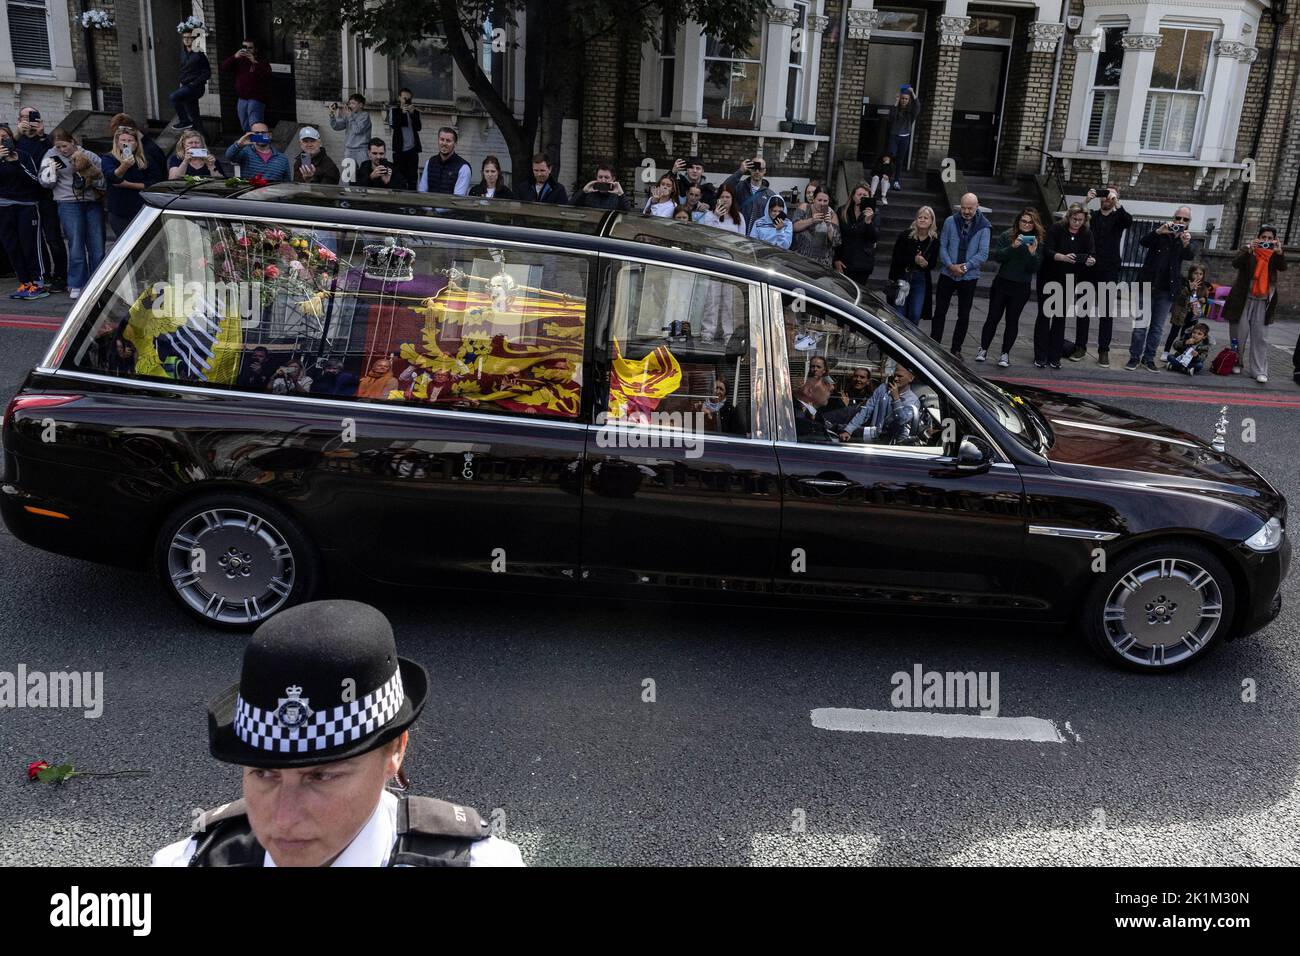 Britain's Queen Elizabeth's coffin is transported, on the day of her state funeral and burial, in London, Britain, September 19, 2022. REUTERS/Carlos Barria Stock Photo